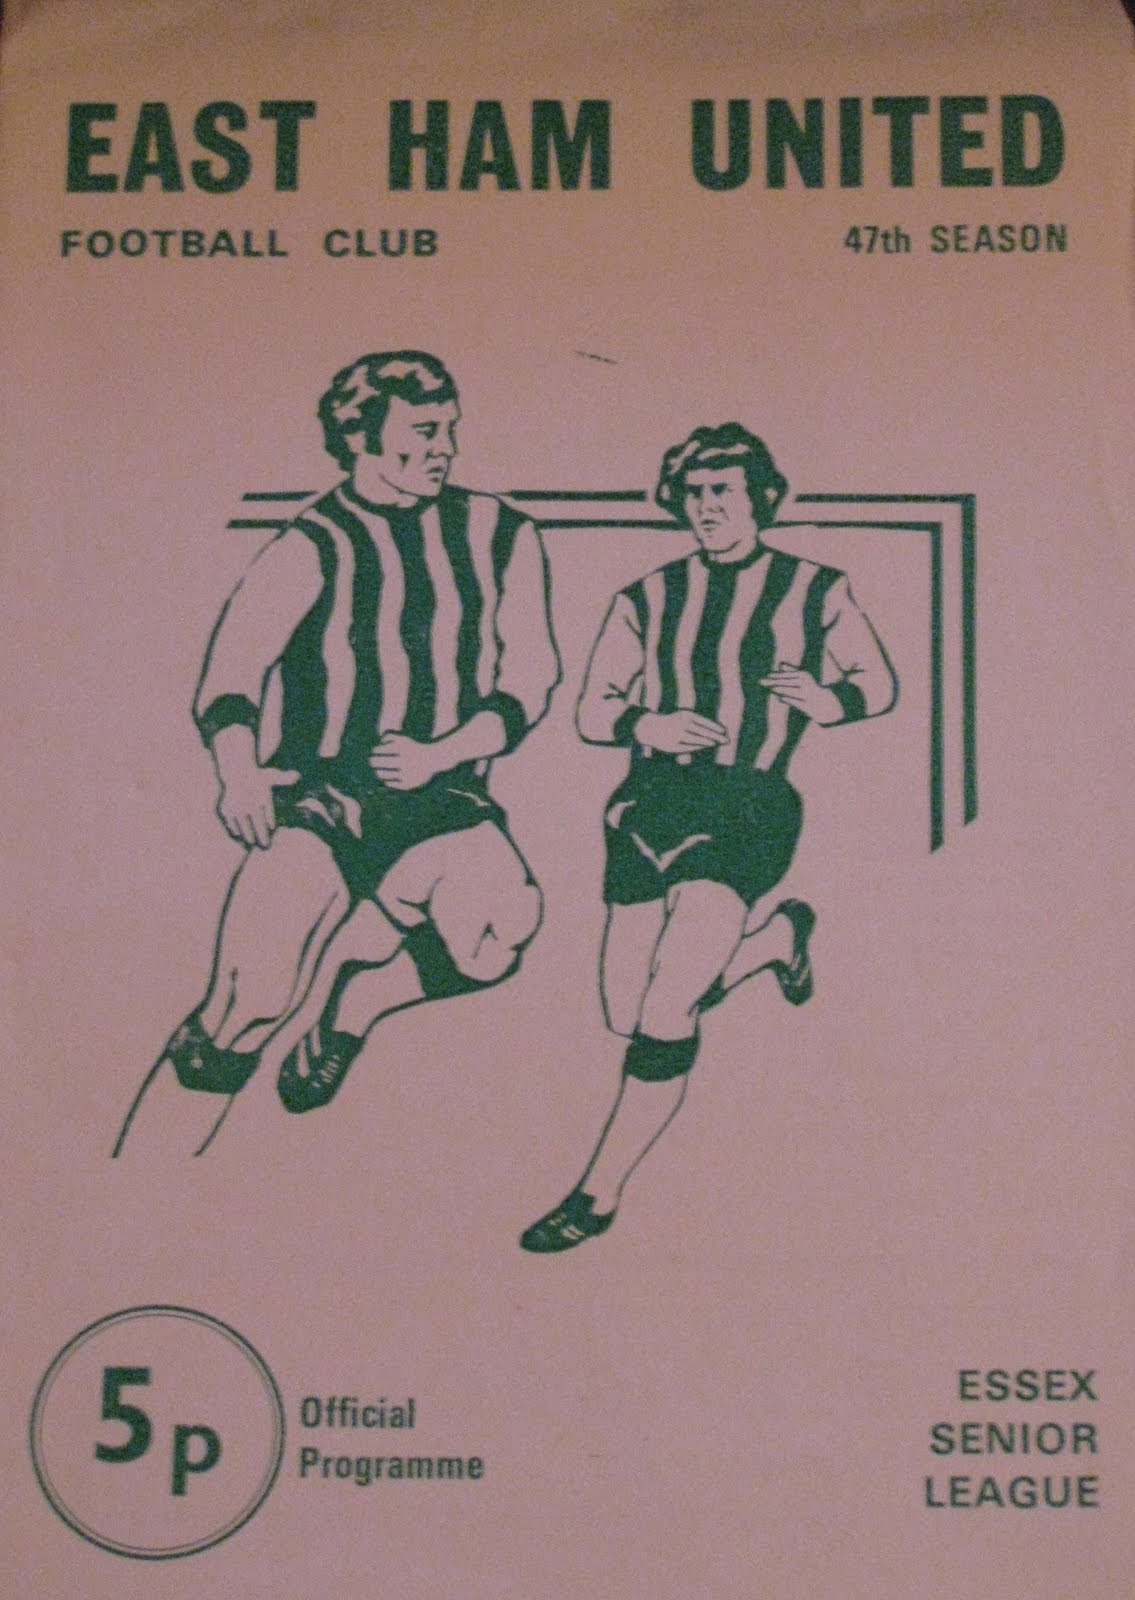 Cold End: FORGOTTEN FOOTBALL - EAST UNITED BECKTON UNITED